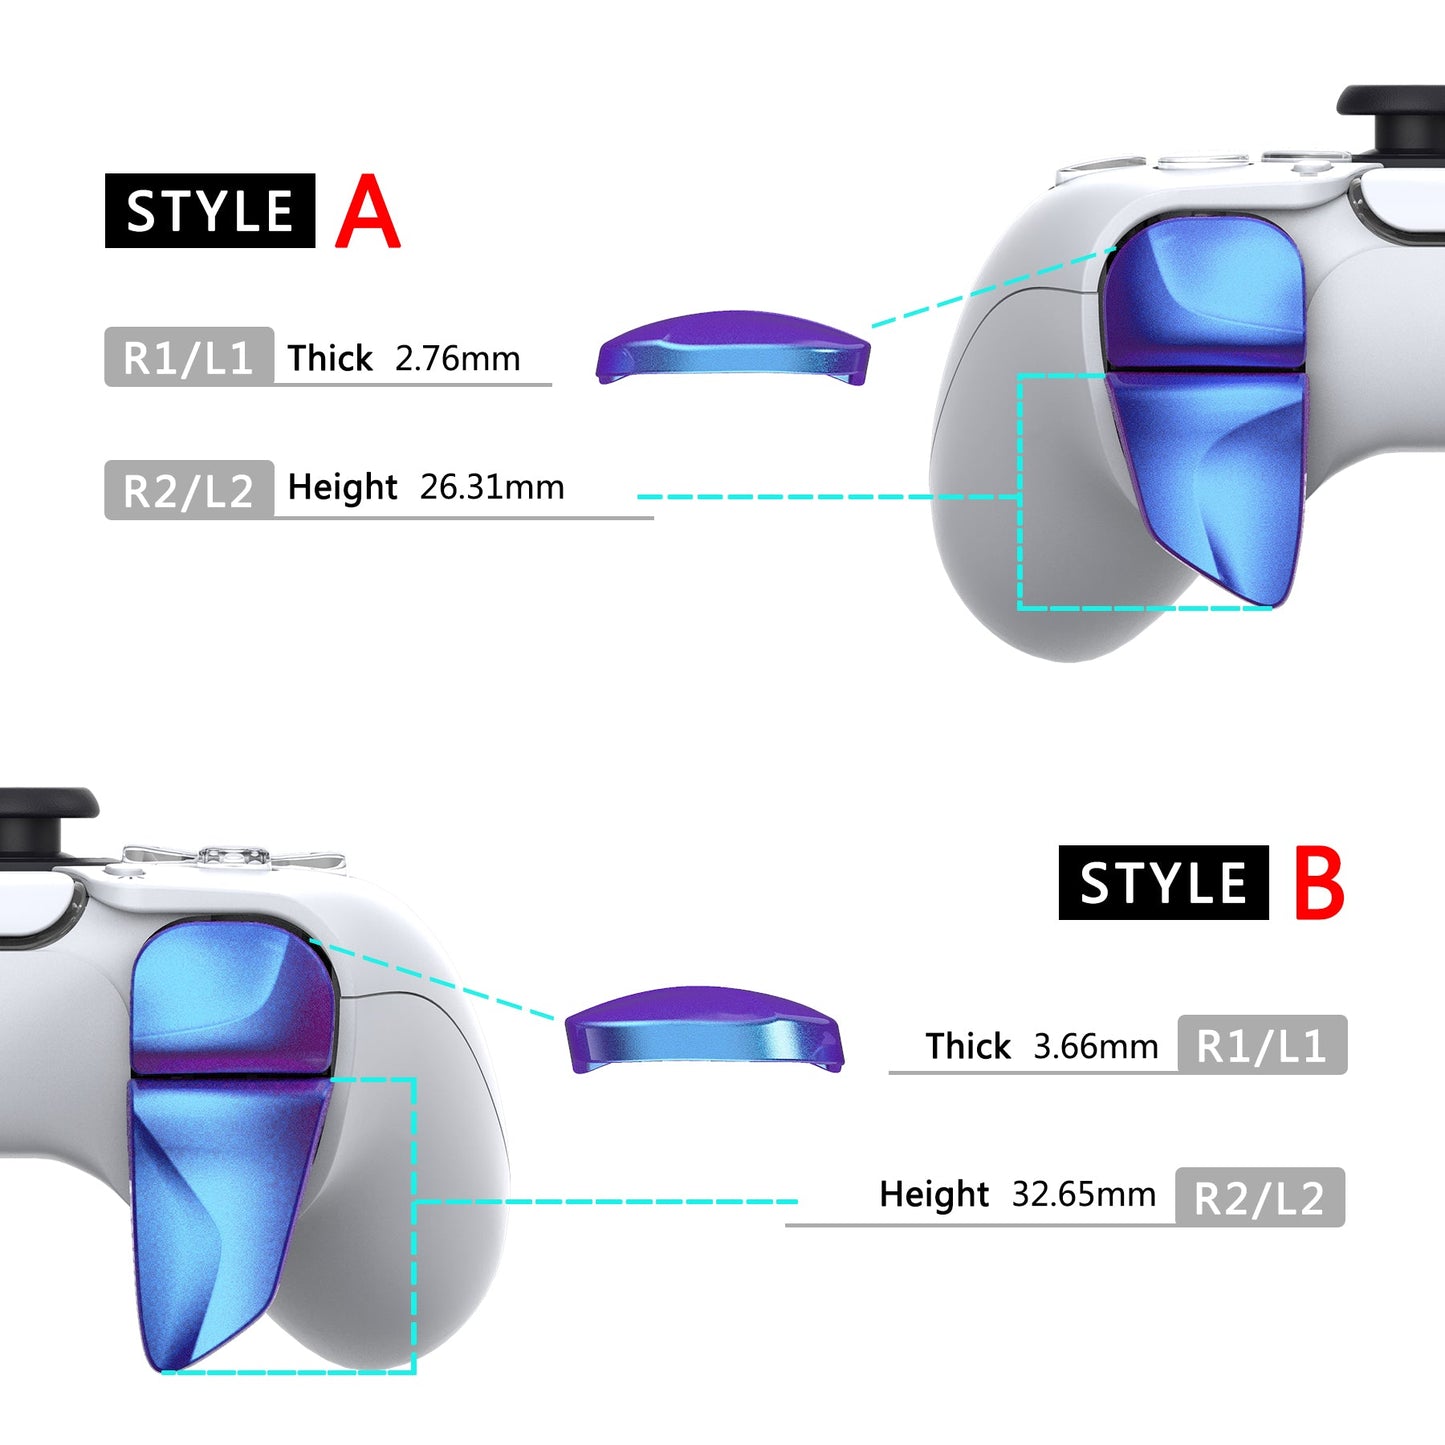 PlayVital Chameleon Purple Blue 2 Pair Shoulder Buttons Extension Triggers for PS5 Controller, Game Improvement Adjusters for PS5 Controller, Bumper Trigger Extenders for PS5 Controller - PFPJ040 PlayVital